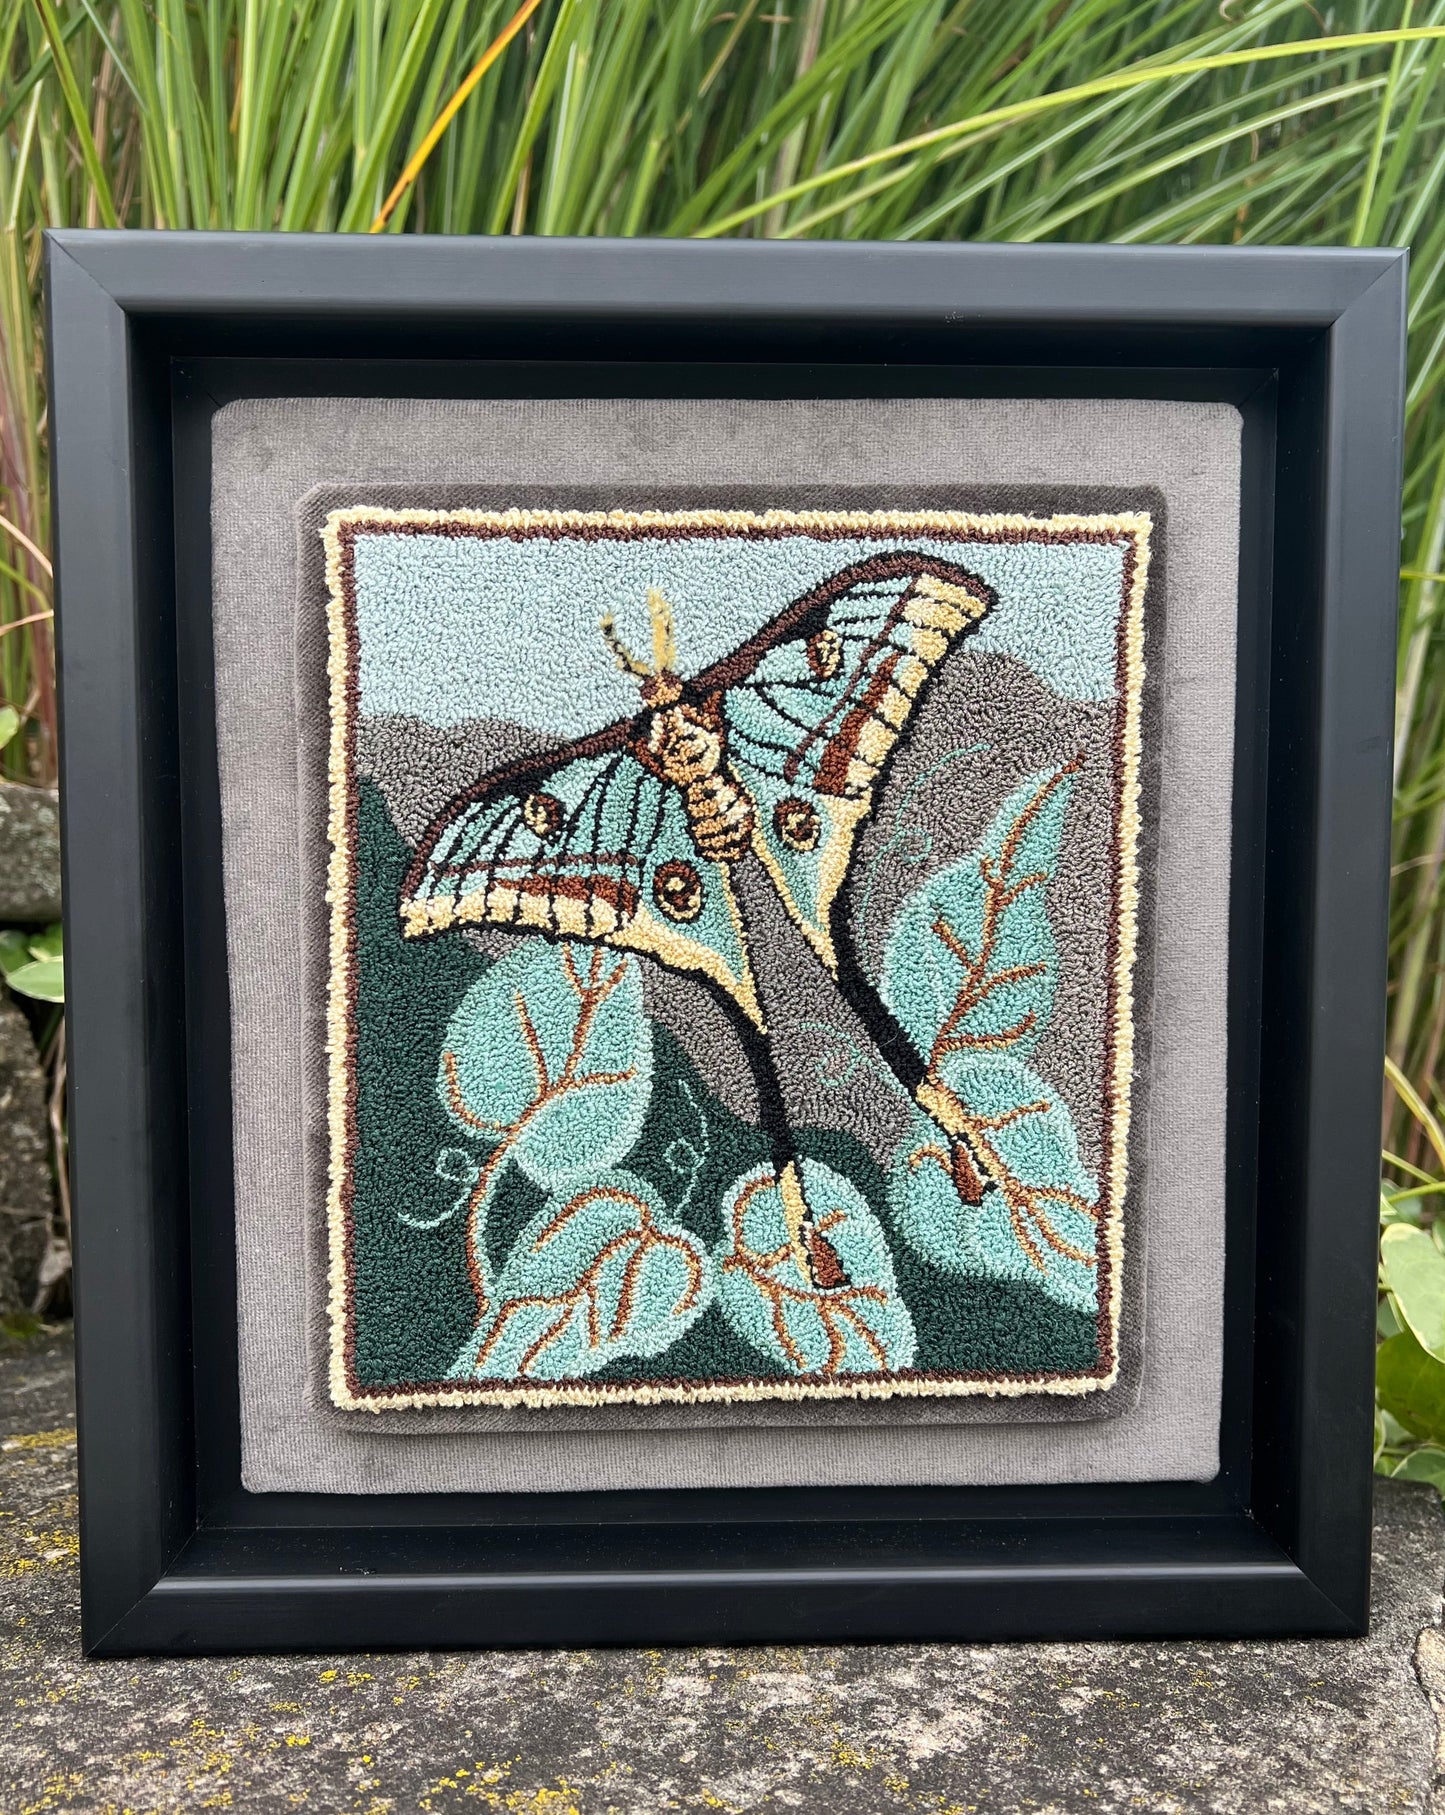 Spanish Moon Moth- Punch Needle Pattern by Orphaned Wool, Copyright © 2023 Kelly Kanyok. This is a beautiful nature inspired design of a this vibrant Spanish Moon Moth. Available as a Paper pattern or a printed on cloth pattern.